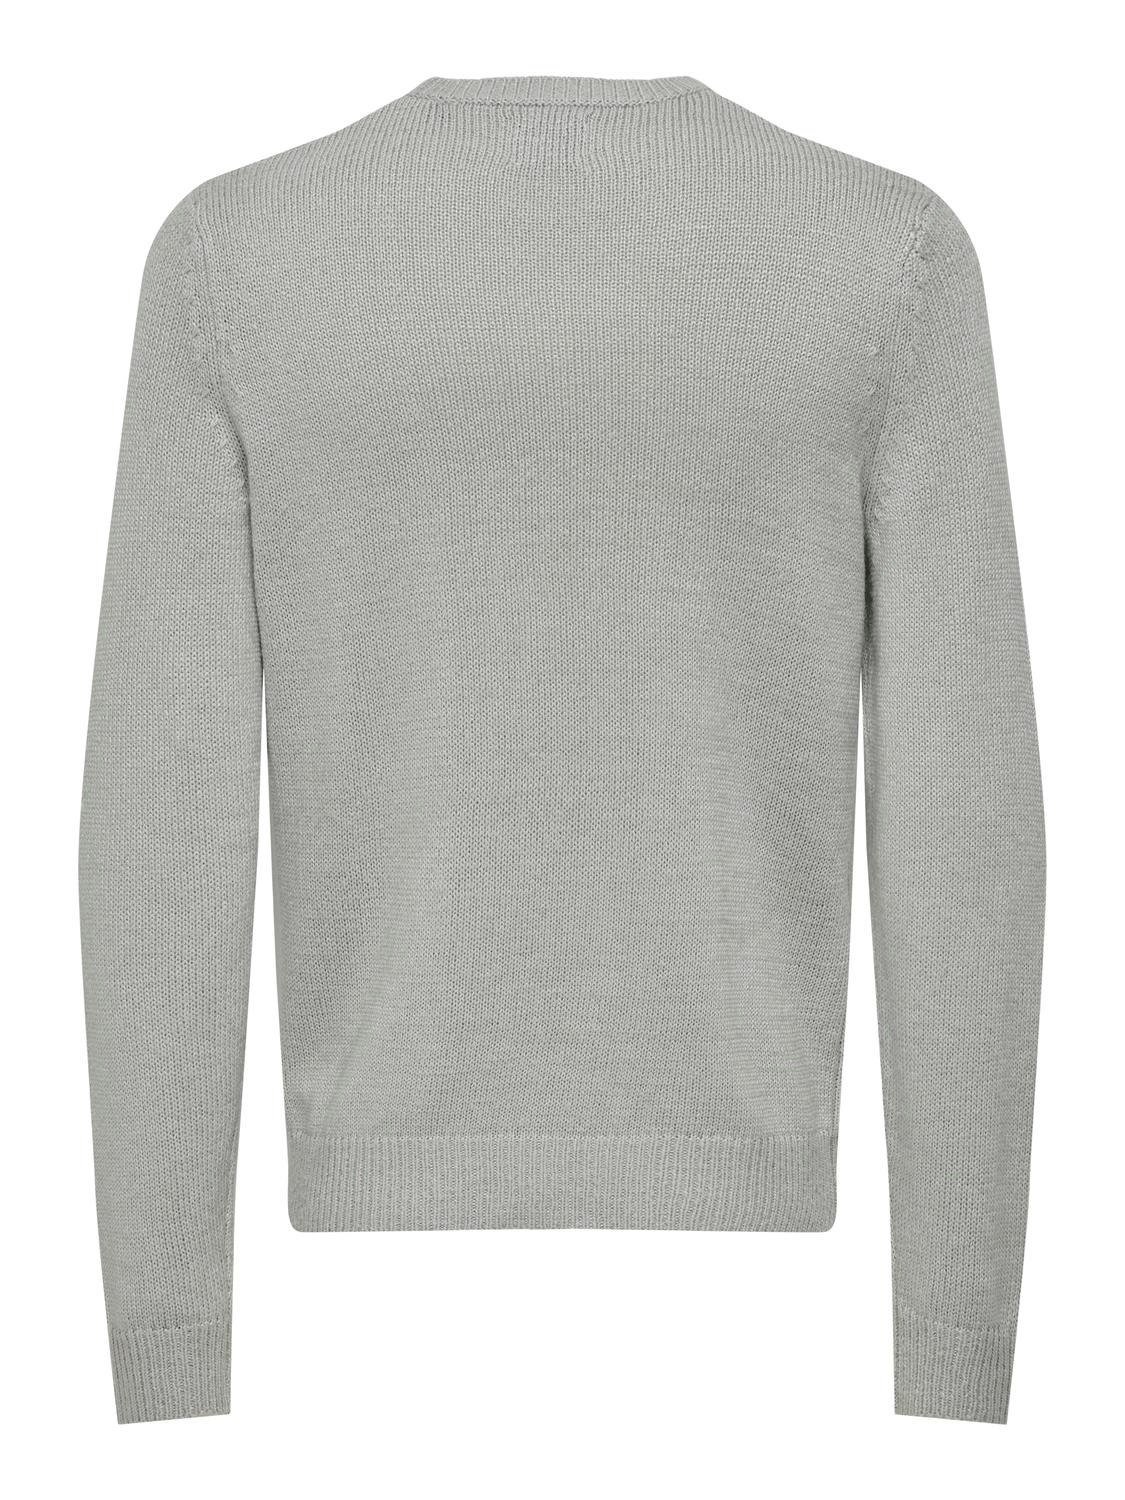 ONLY & SONS Round Neck Pullover -Mirage Gray - 22027486